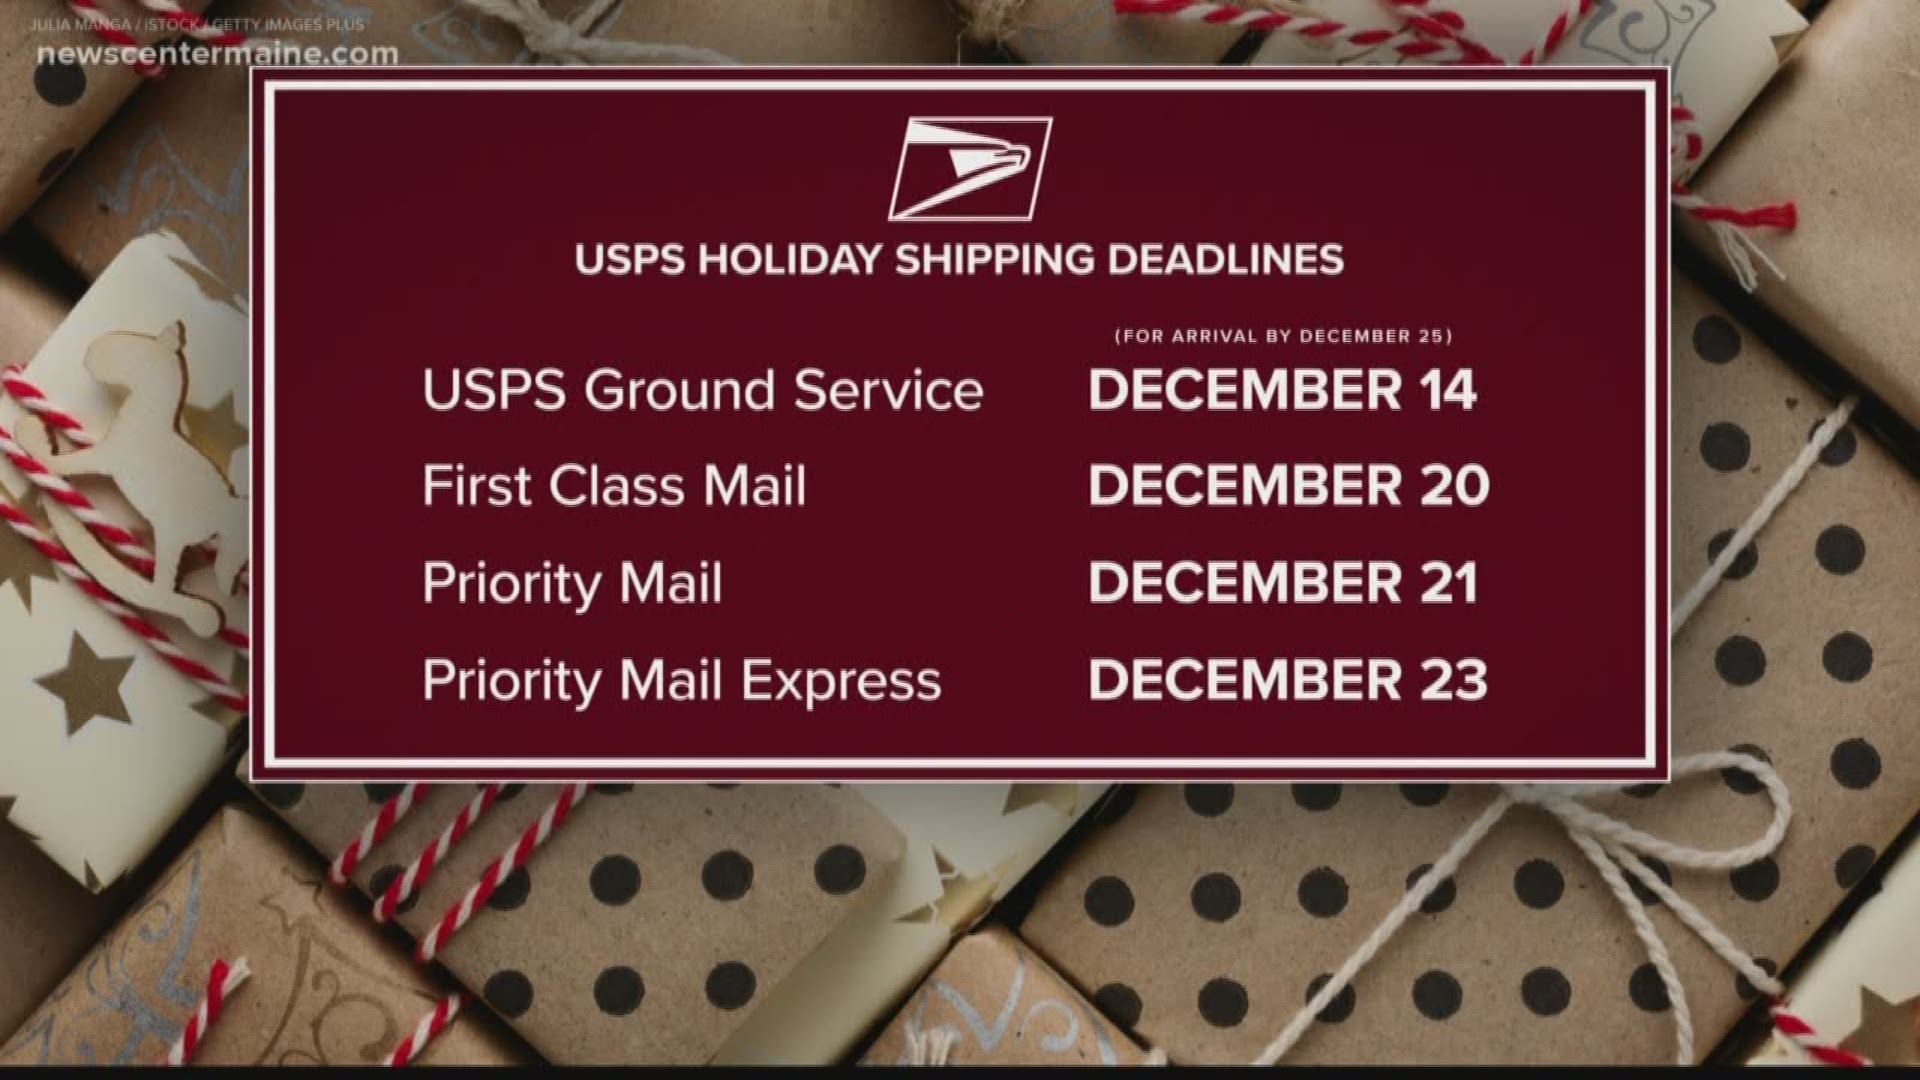 Ship those holiday gifts!